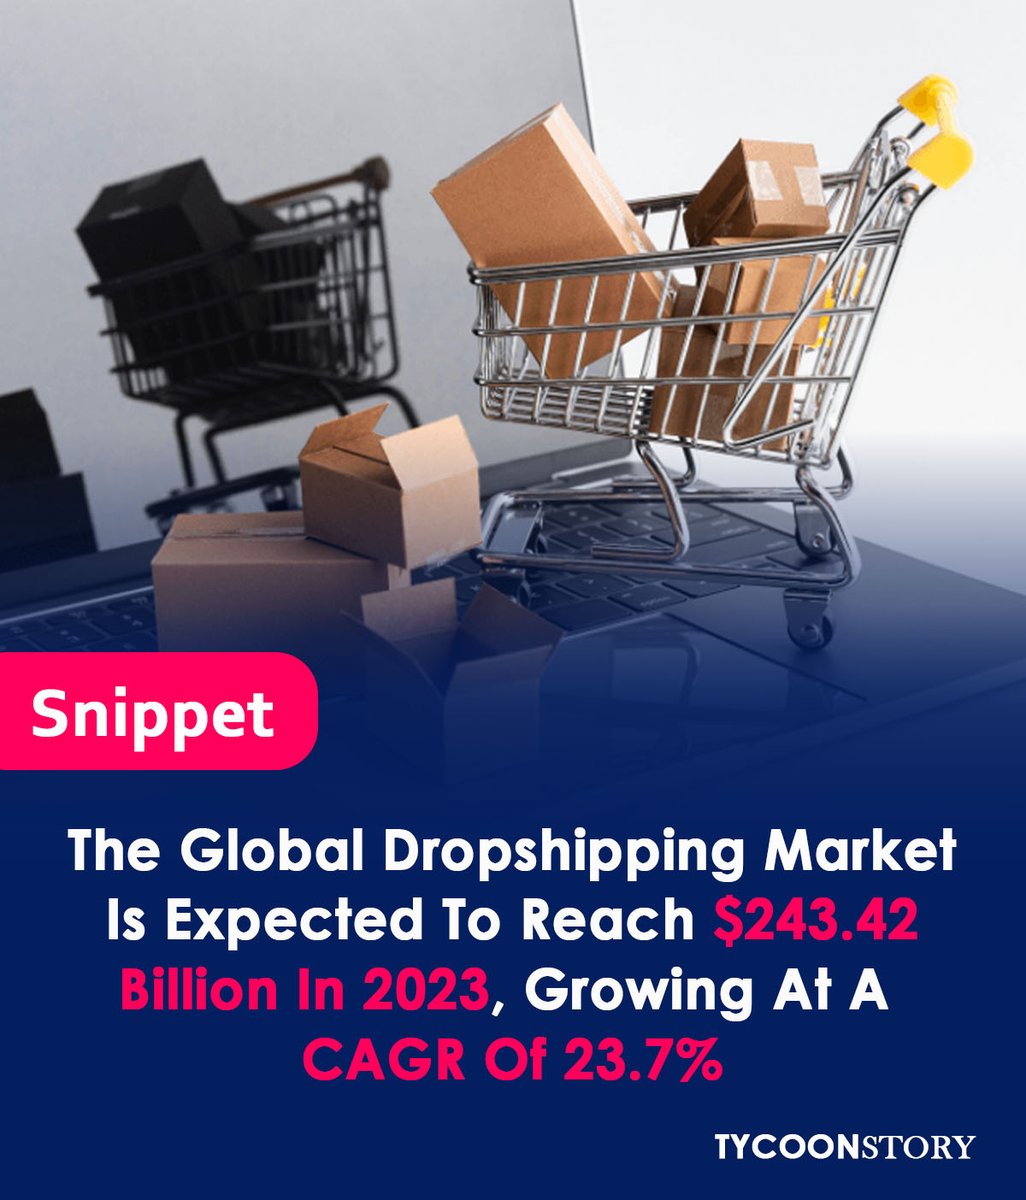 The market for dropshipping is anticipated to reach $243.42 billion by 2023, expanding at a CAGR of 23.7%.

#OnlineRetail #RetailRevolution #EcommerceGrowth #DigitalCommerce #globalmarket #mobileshopping  #onlinebusiness @sellviallc @wholesale2b @spocketofficial @Modalyst